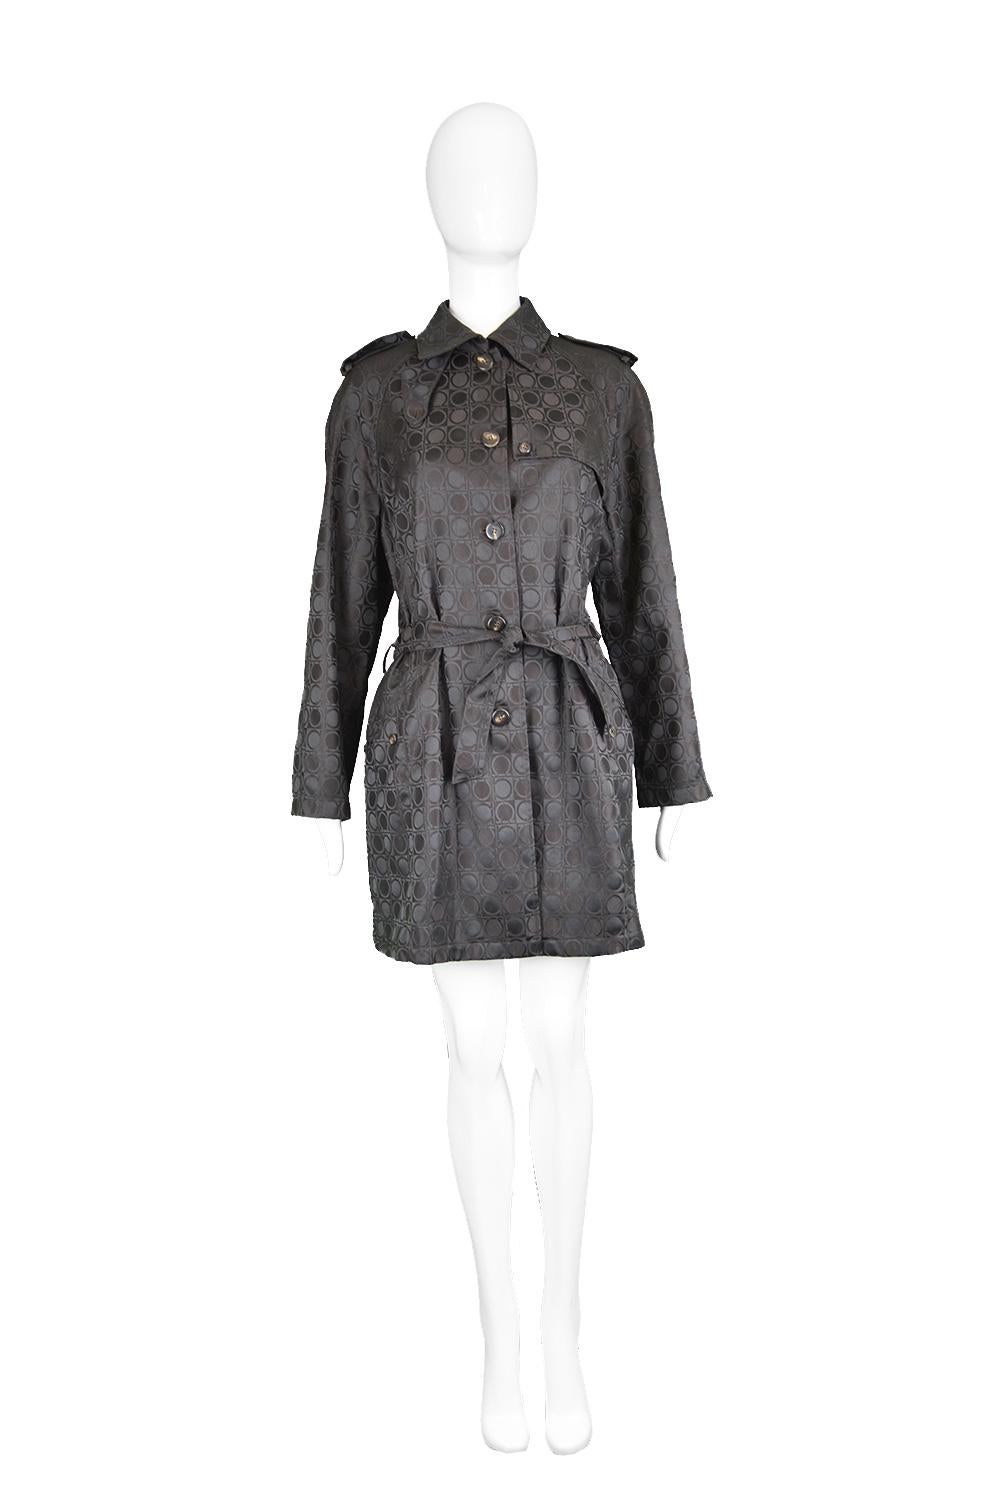 Salvatore Ferragamo Vintage Women's Black Subtly Iridescent Logo Pattern Jacquard Coat

Size: Marked I 42 / US 8 / F 40 / D 38 but this gives a loose fit like most trench coats and would best fit a medium to Large. Please check measurements